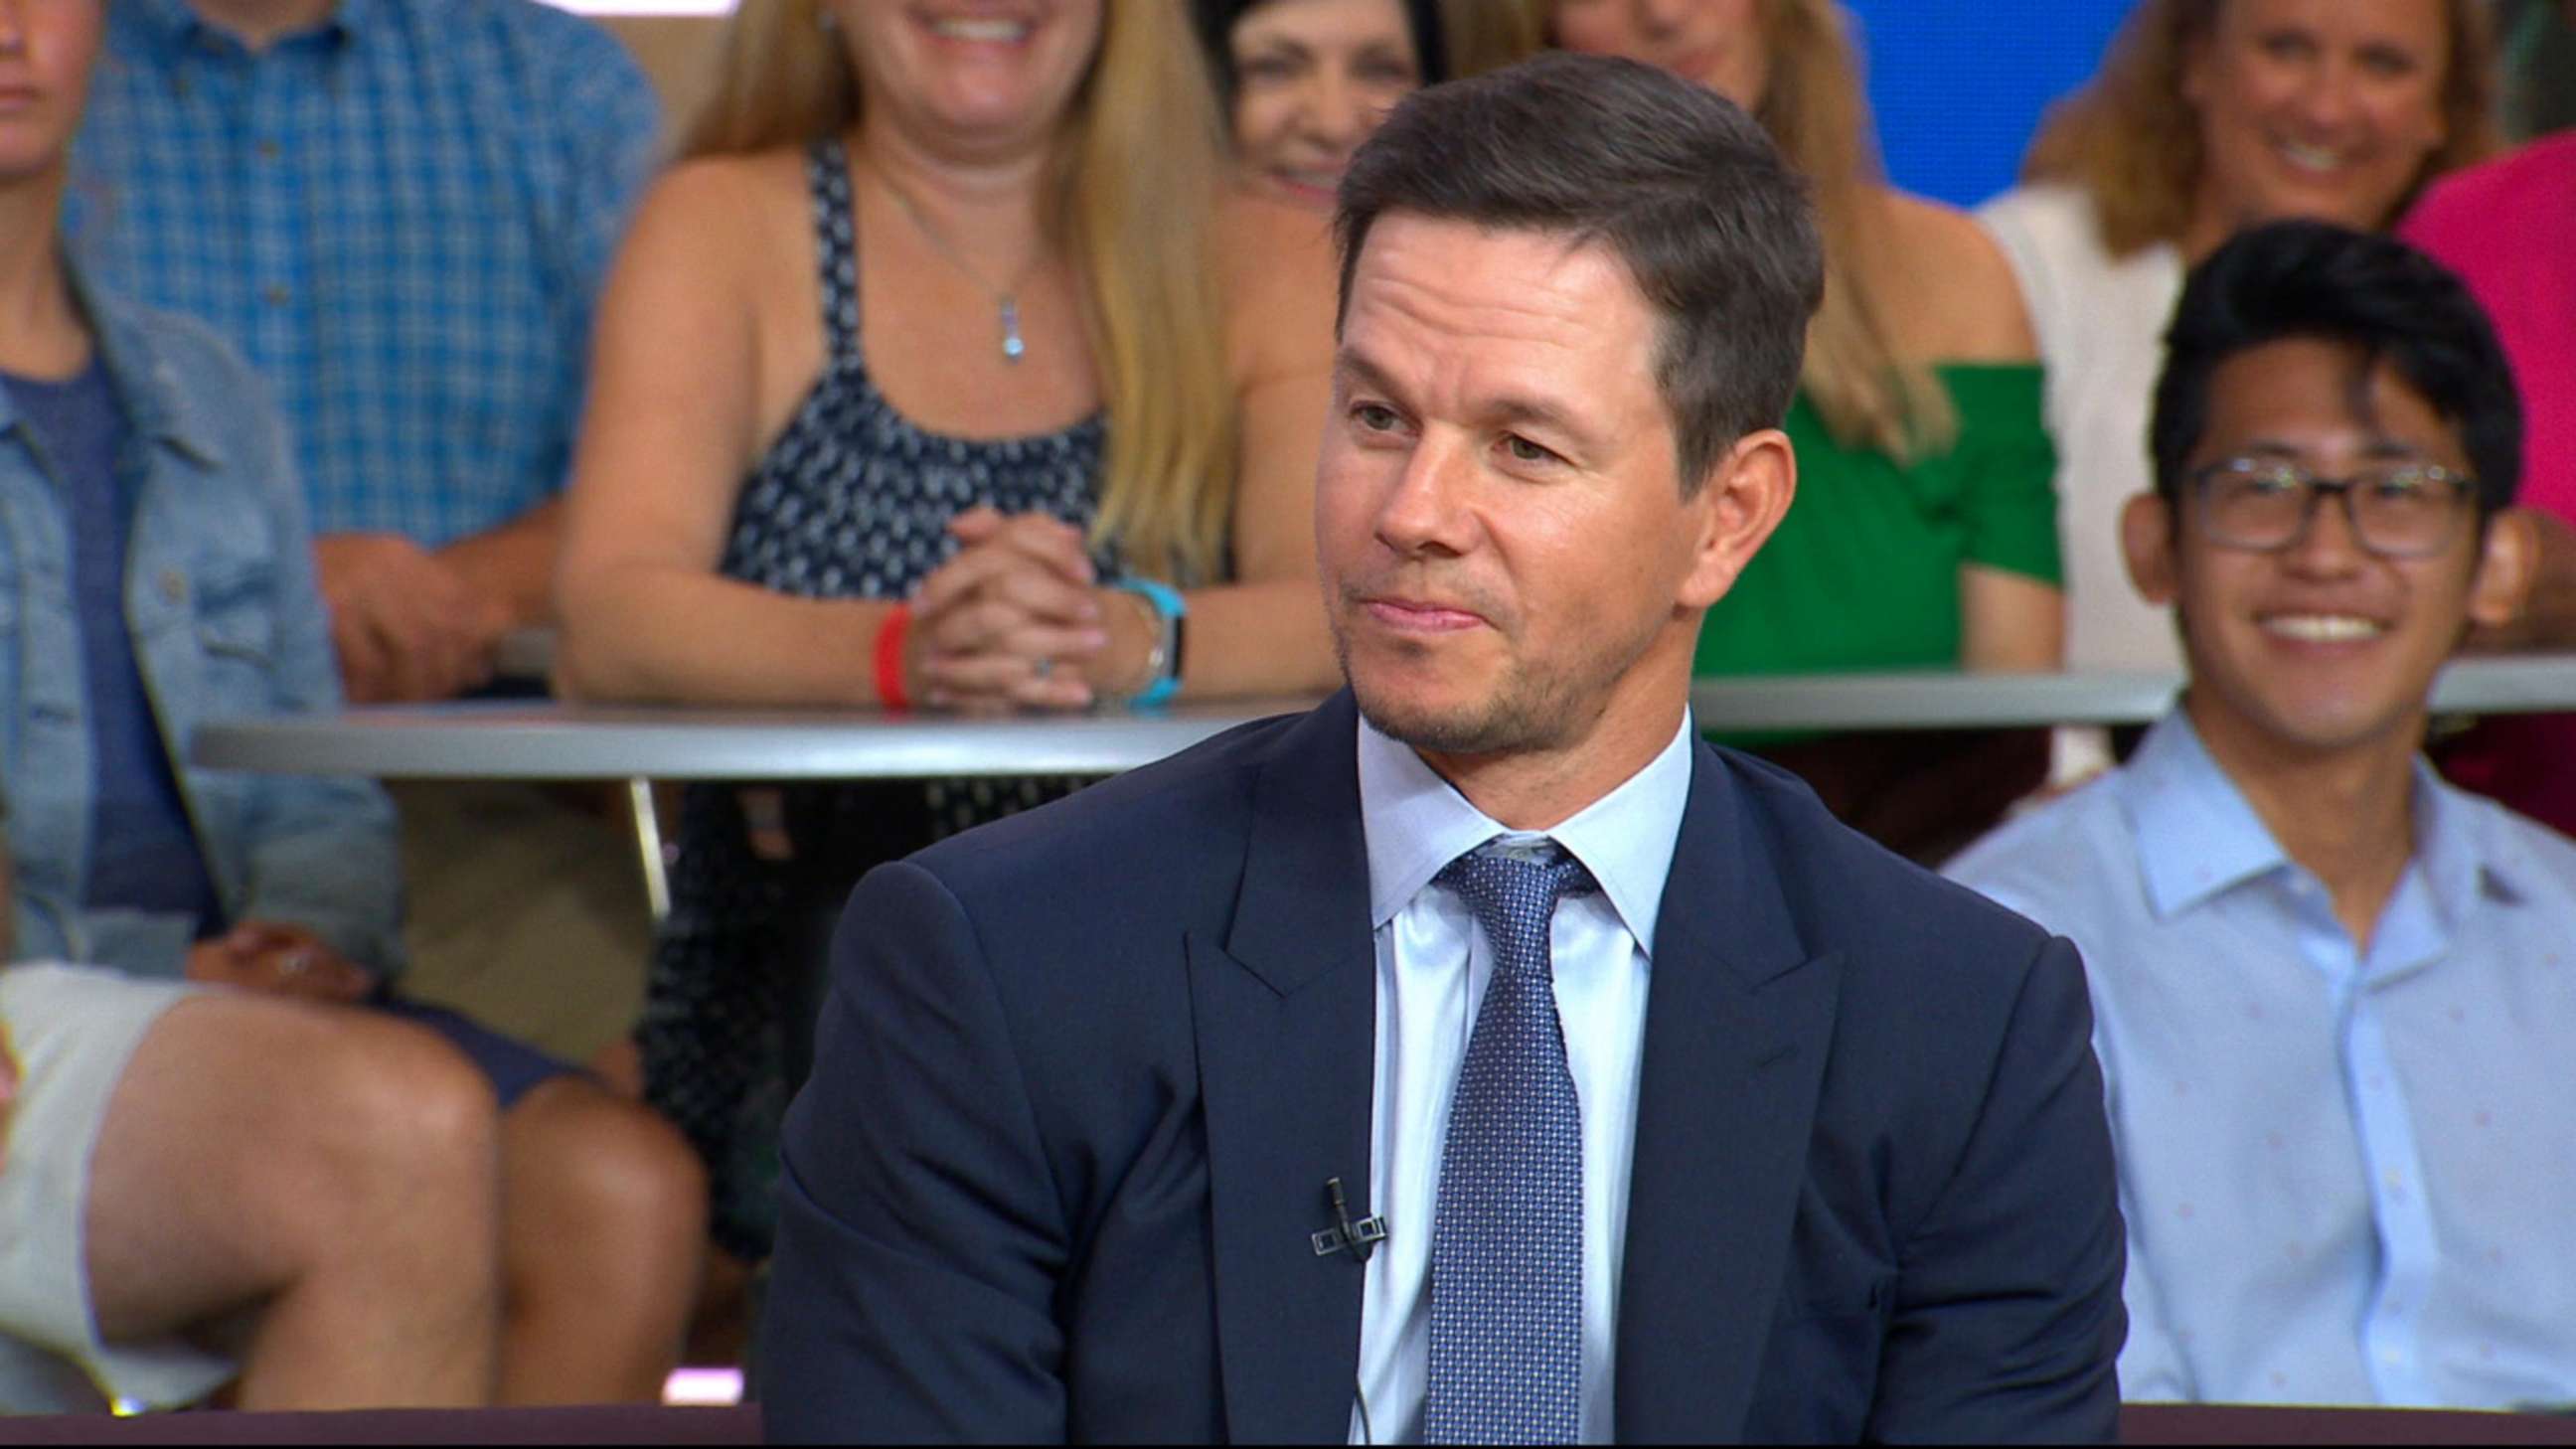 PHOTO: Mark Wahlberg stopped by ABC's "Good Morning America" on Aug. 14 to discuss his new film, "Mile 22."